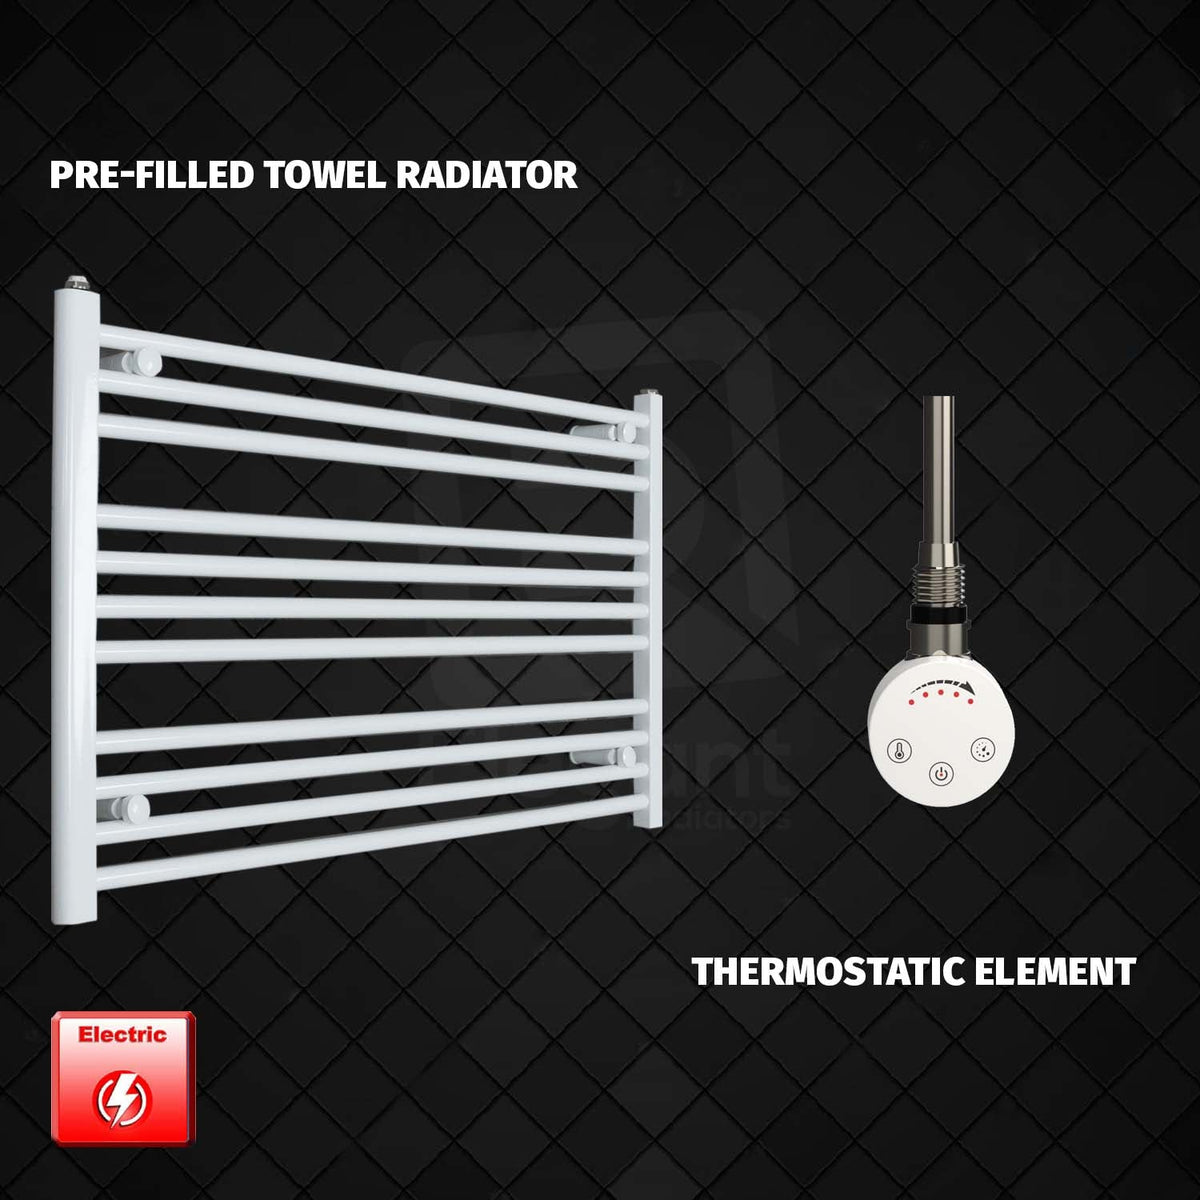 600 x 1200 Pre-Filled Electric Heated Towel Radiator White HTR SMR Thermostatic element no timer